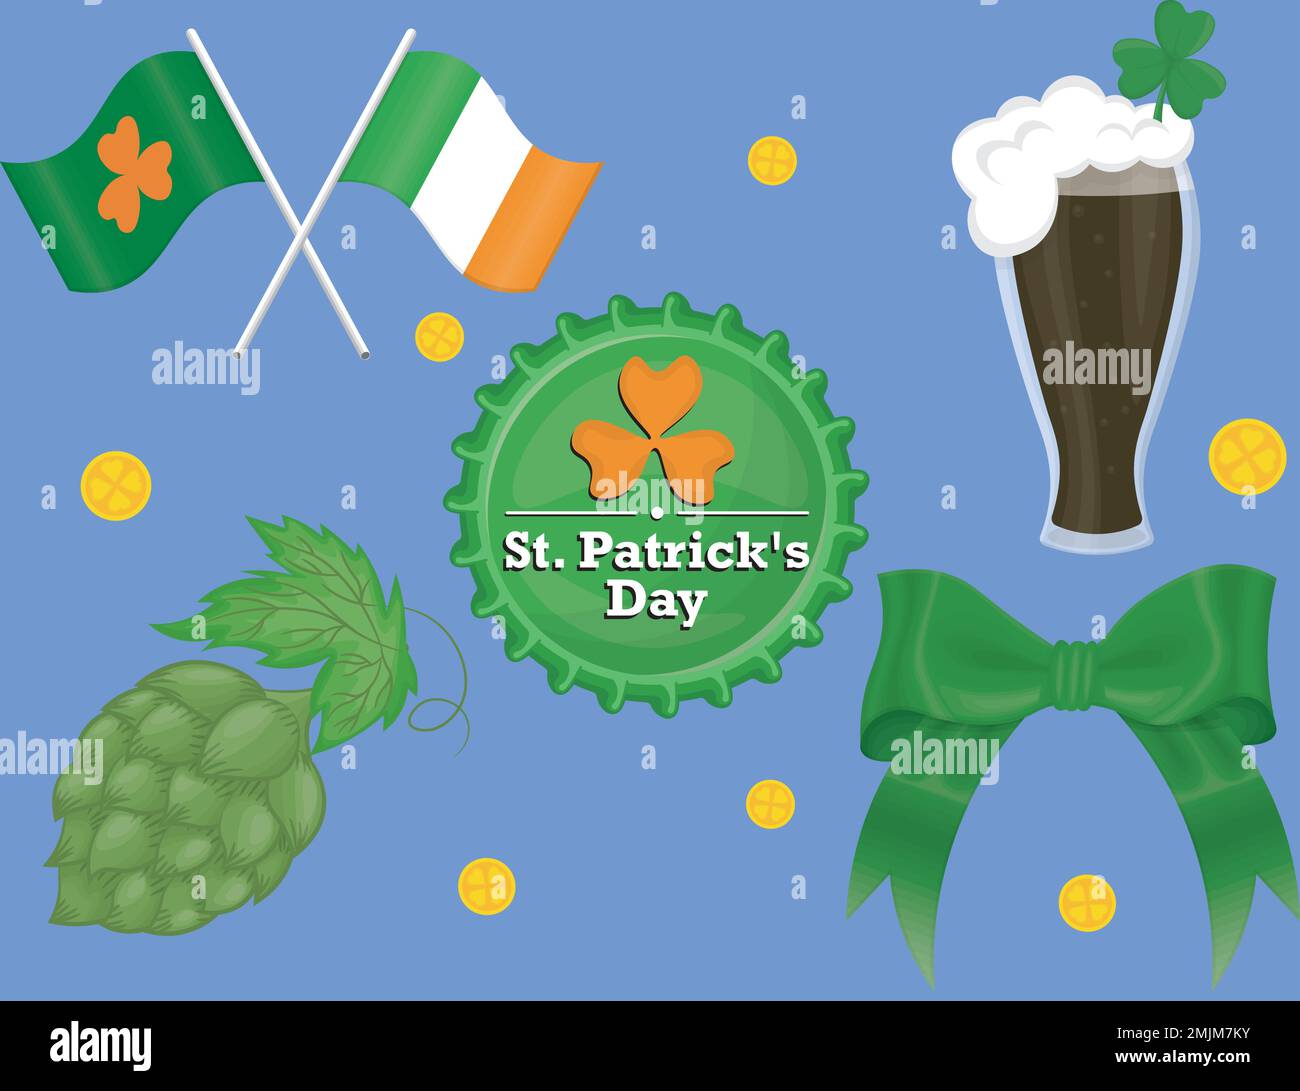 a set for saint patricks day includes crossed flags, bottle cap, glass of beer, hop and green ribbon Stock Vector